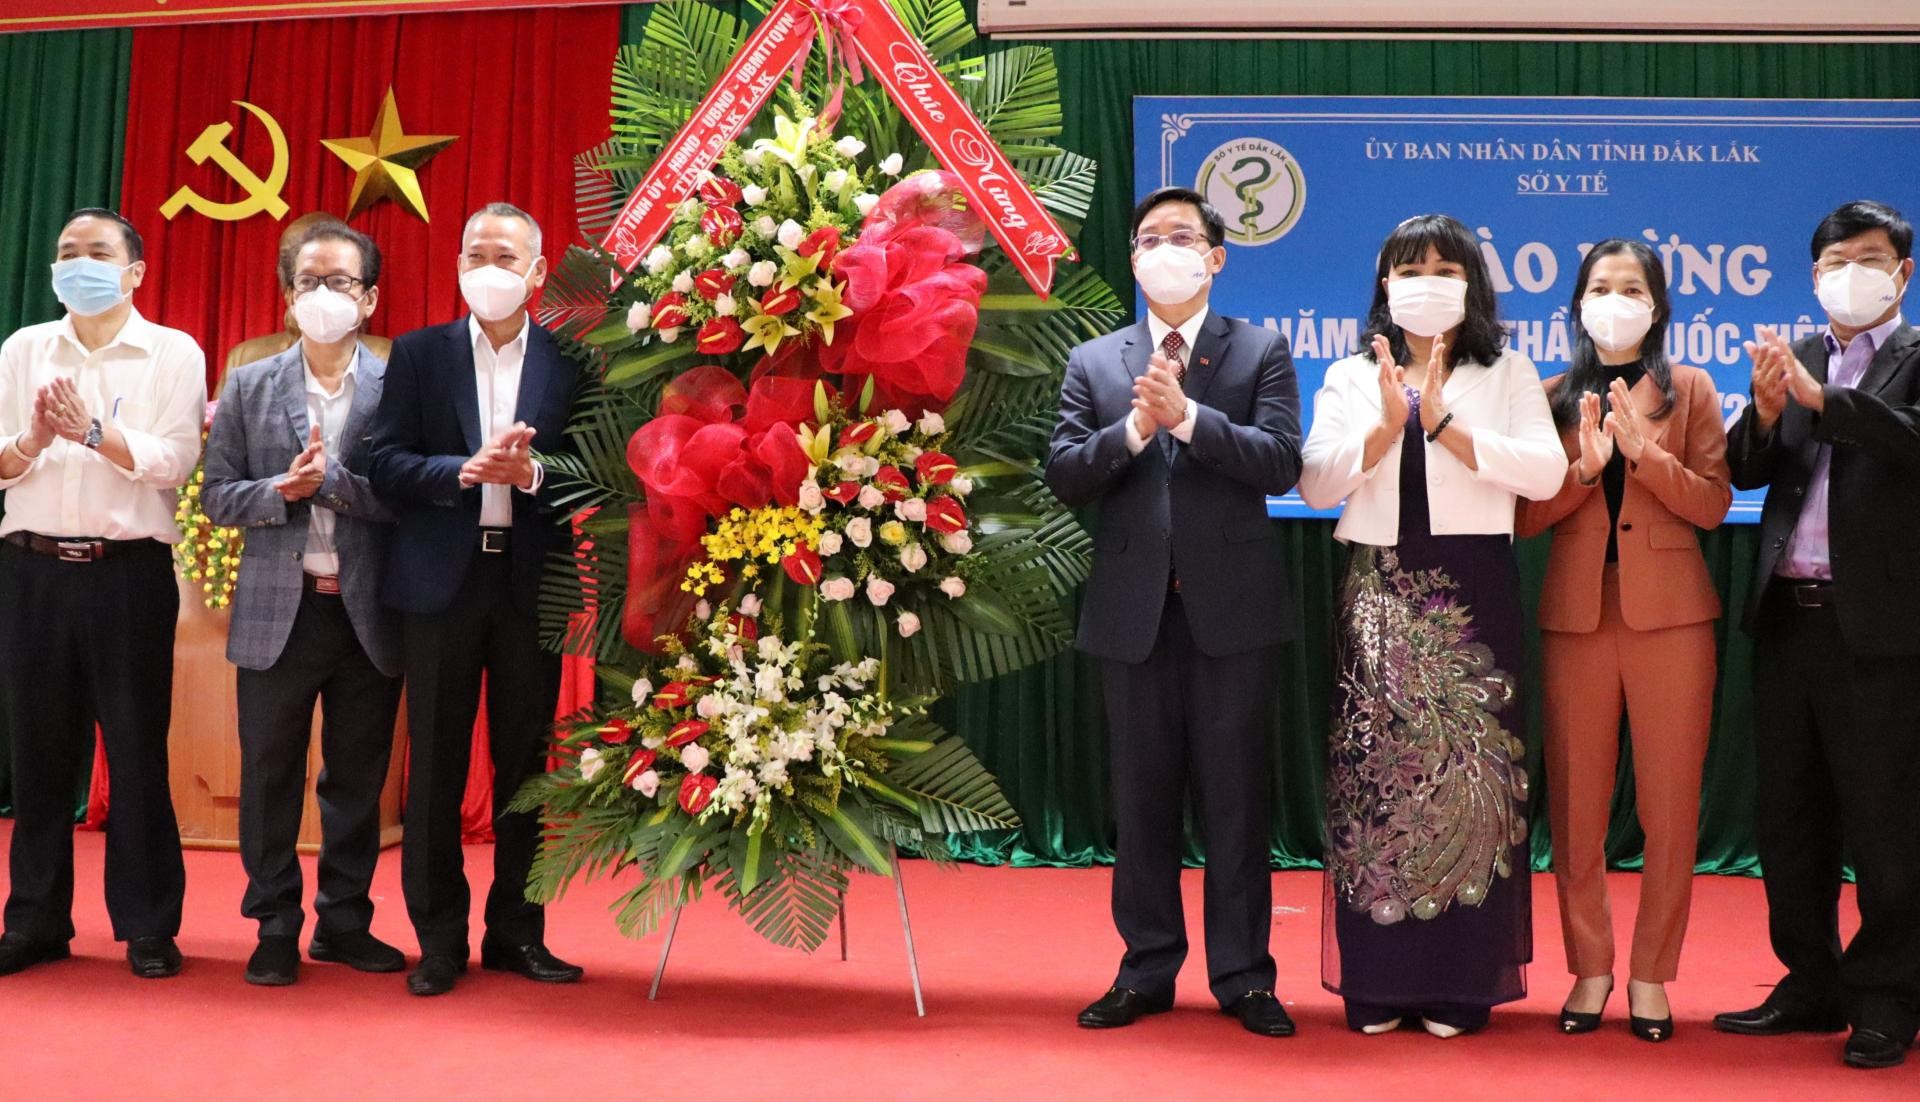 The province’s leaders visited and wished a happy Vietnamese Doctors’ Day to the health sector